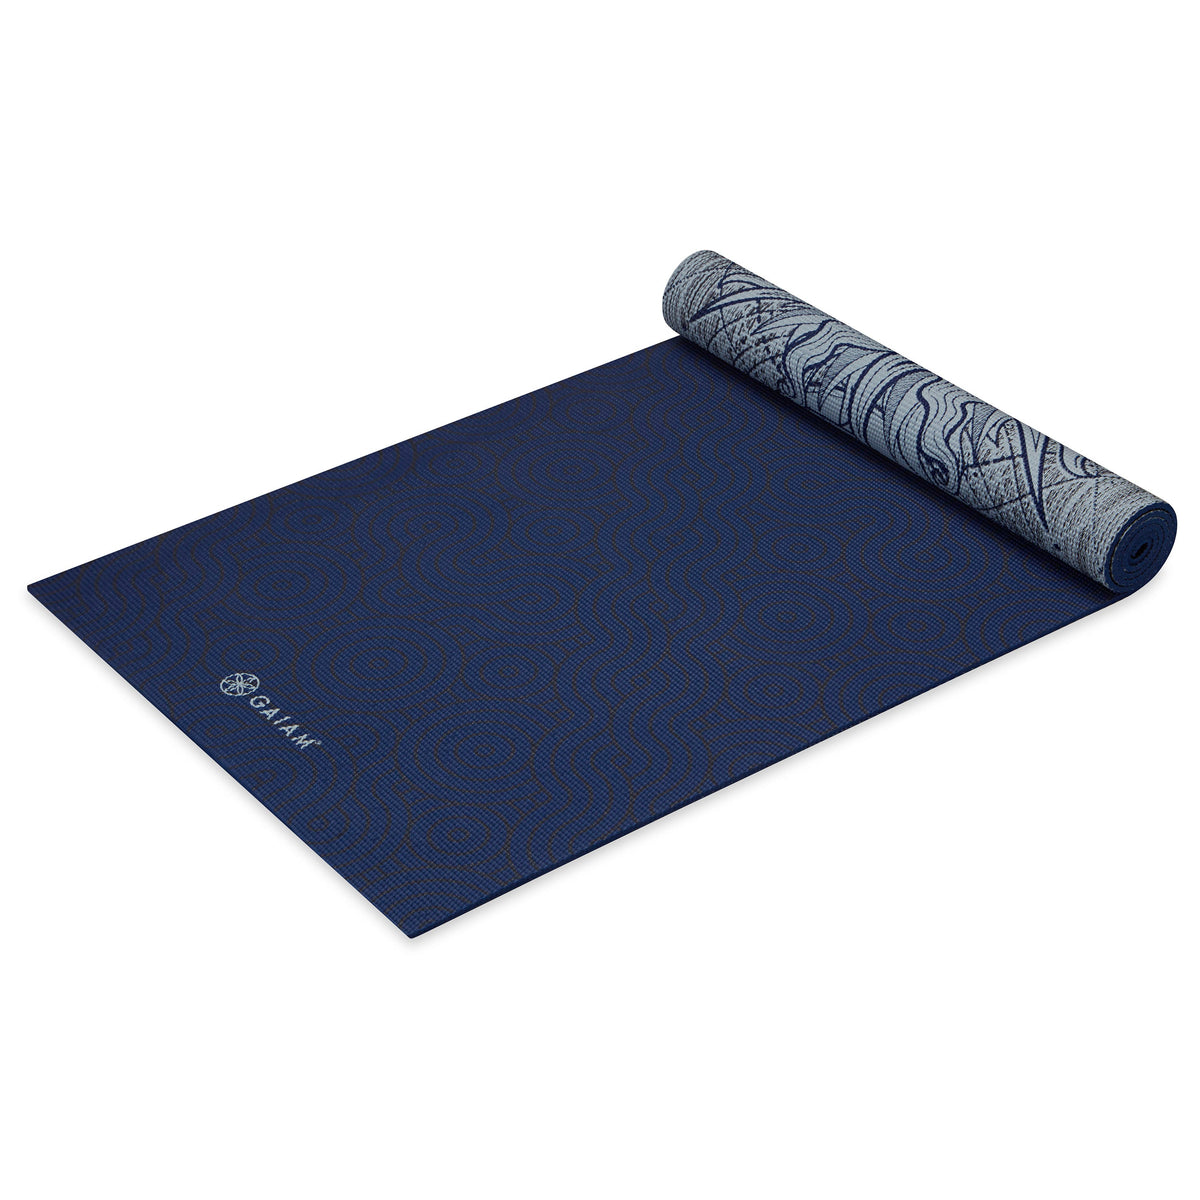 Premium Reversible Yoga Mat - Ethereal Beauty (6mm) reverse top rolled angle